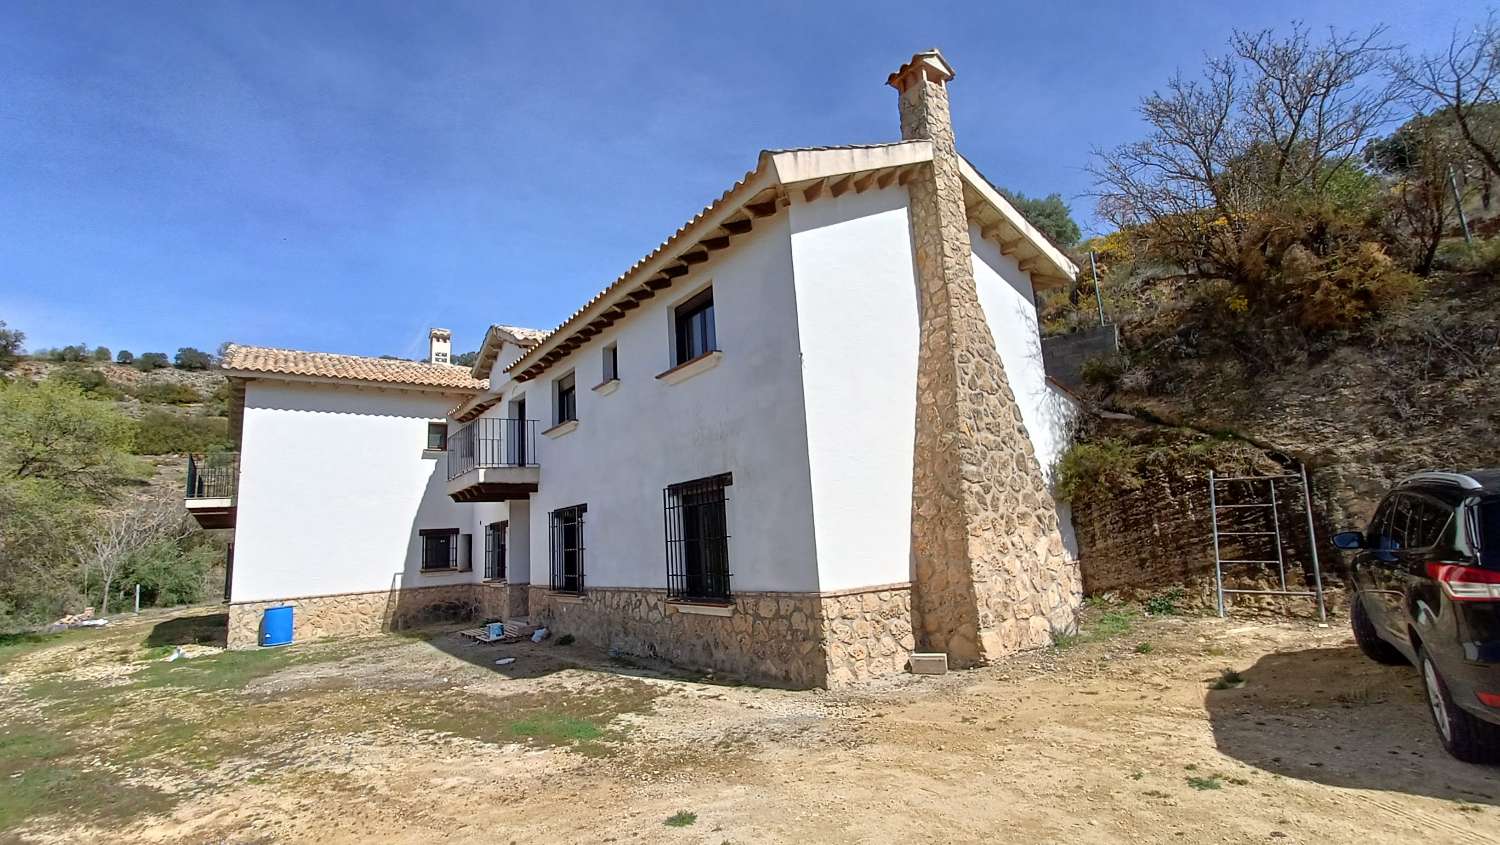 MONTEFRÍO UNIQUE  9 BEDROOM 10 BATHROOM ANDALUCIAN COUNTRY HOUSE WITH SPECTACULAR VIEWS